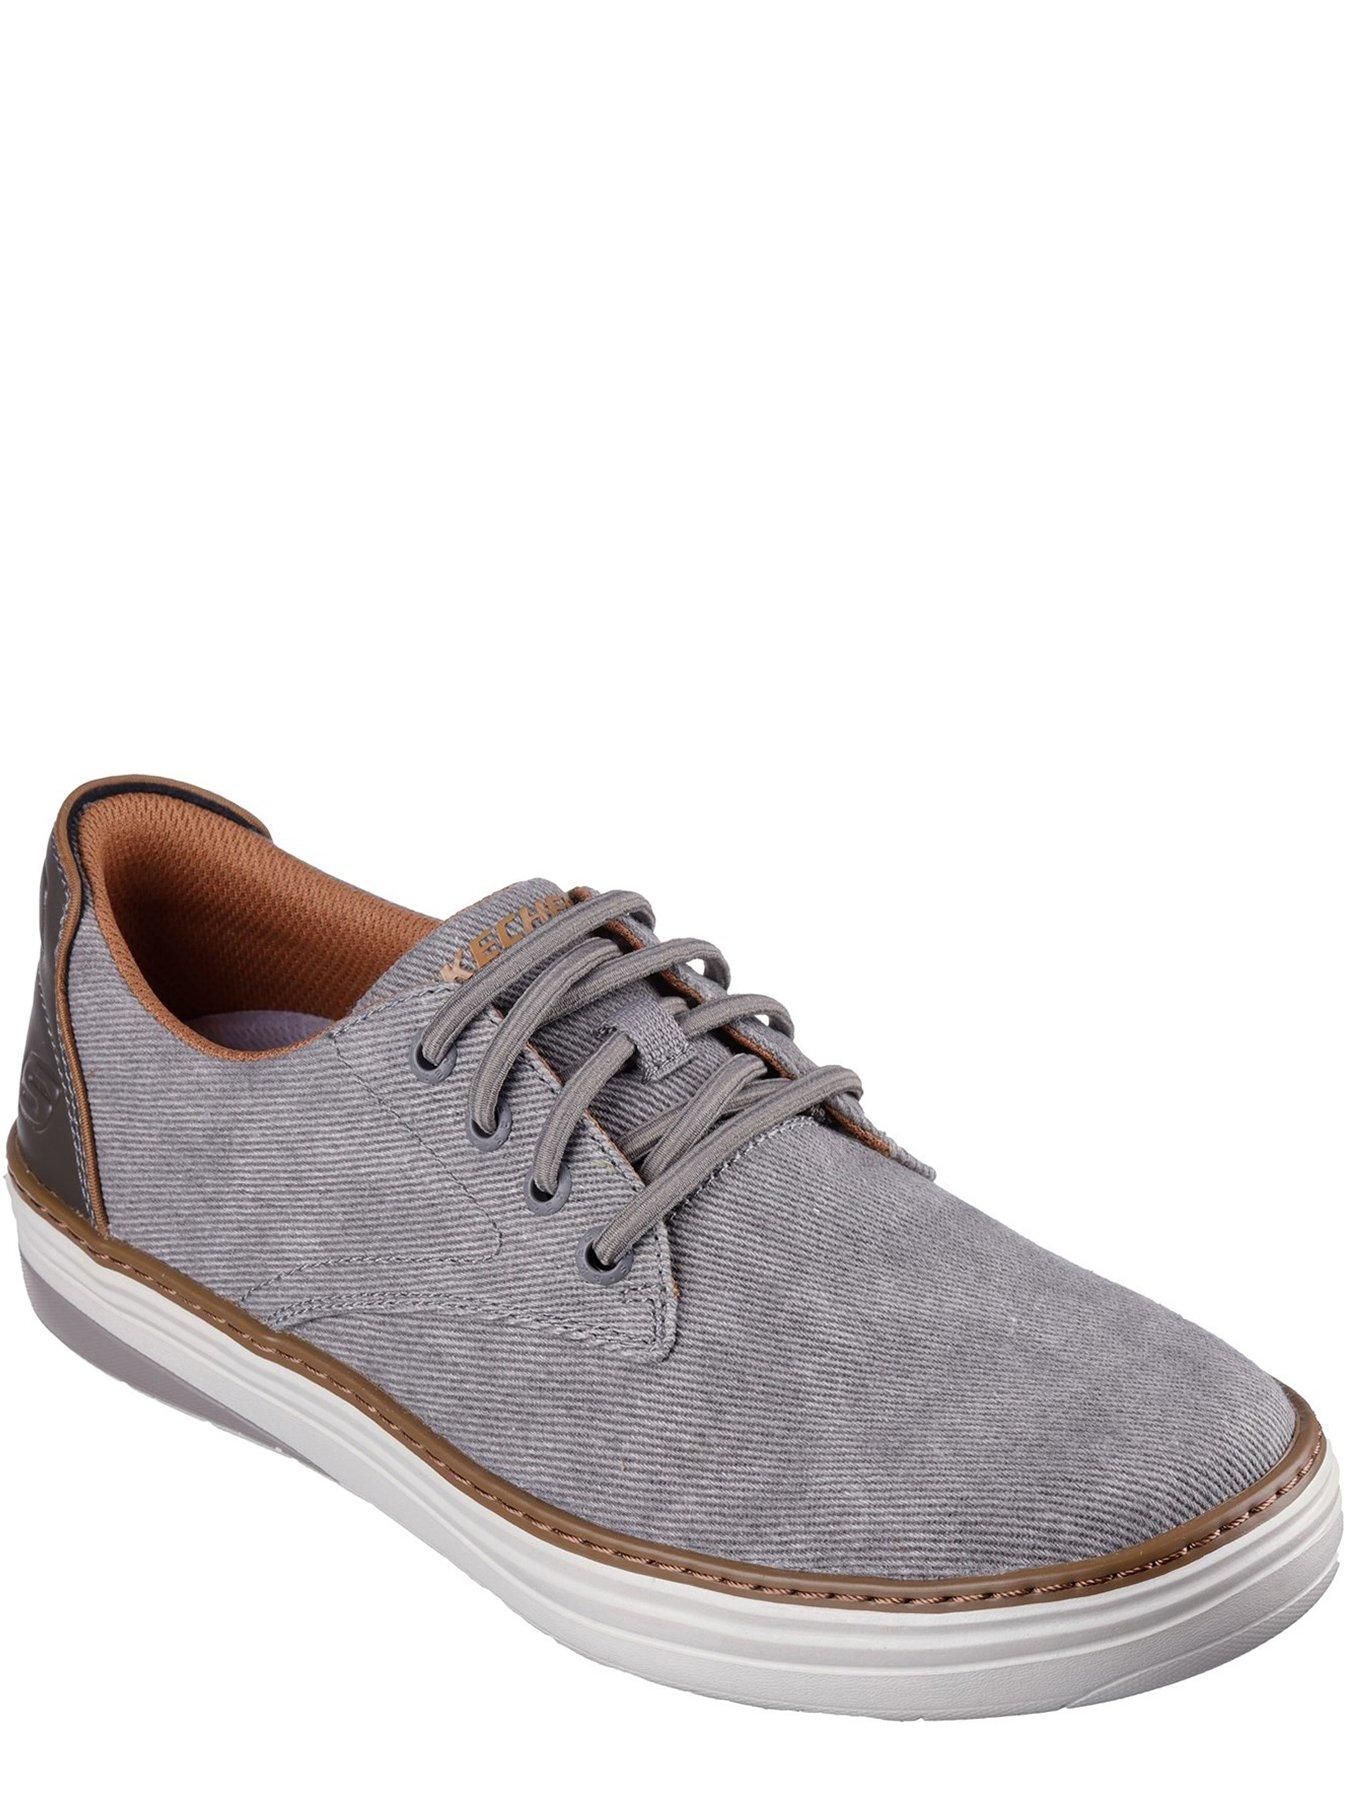 Skechers Hyland Ratner Casual Lace Up Shoes - Grey | very.co.uk